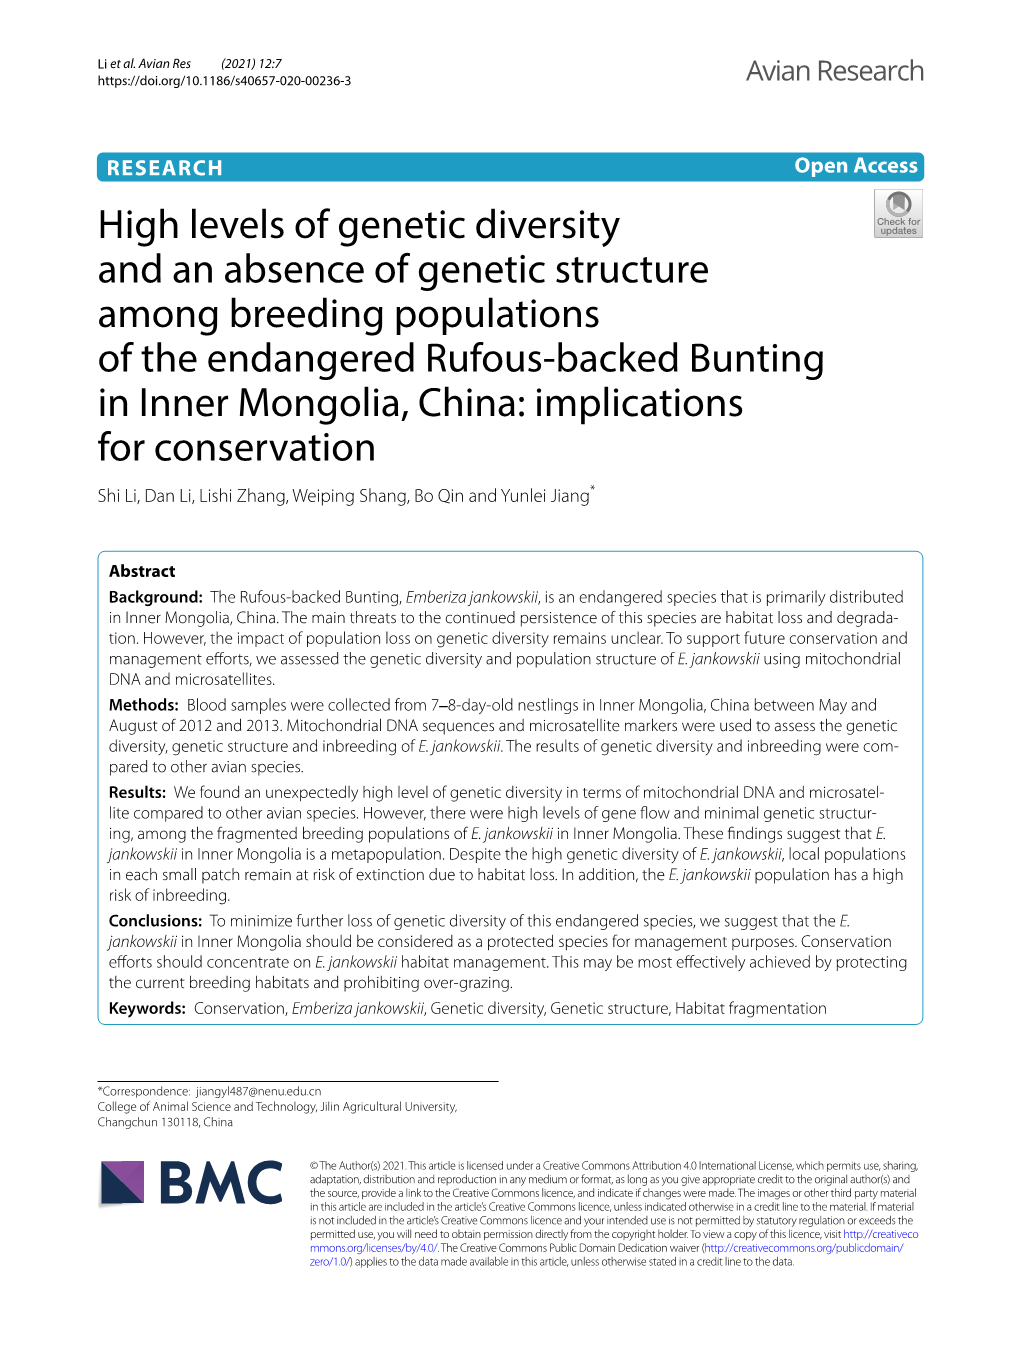 High Levels of Genetic Diversity and an Absence of Genetic Structure Among